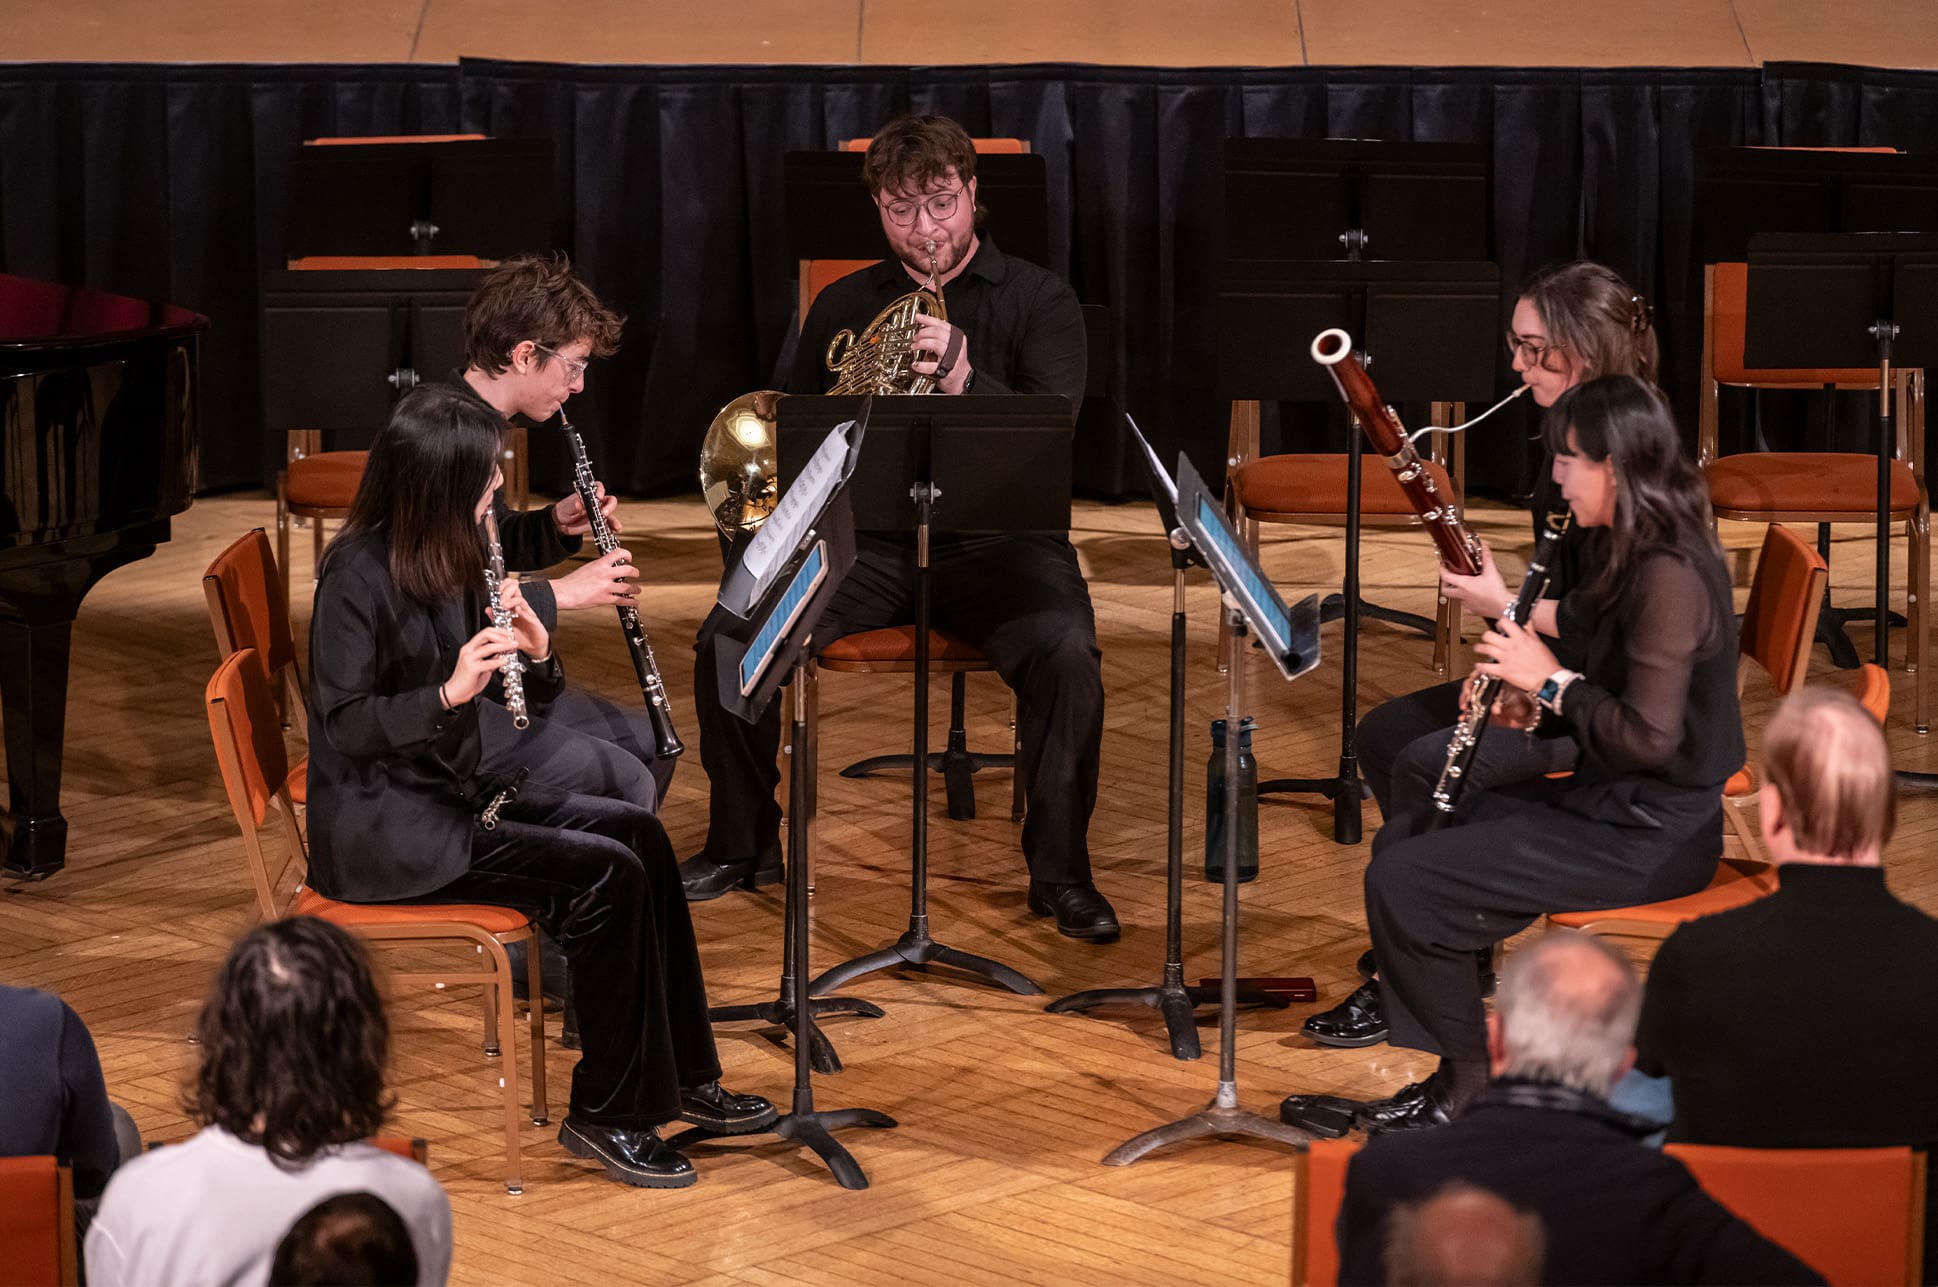 Small ensemble dressed in black performing